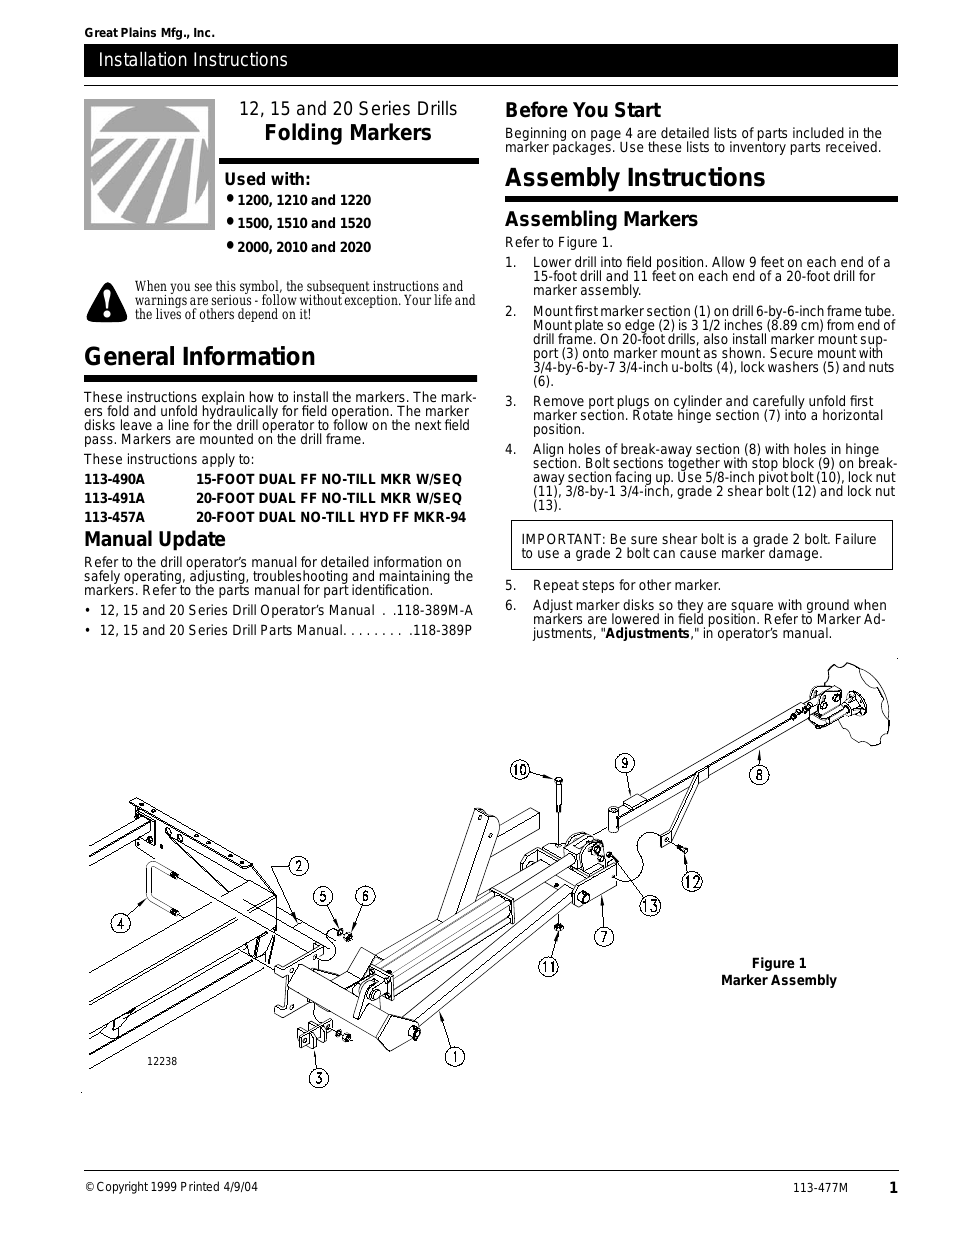 12 Series Drills Assembly Instructions